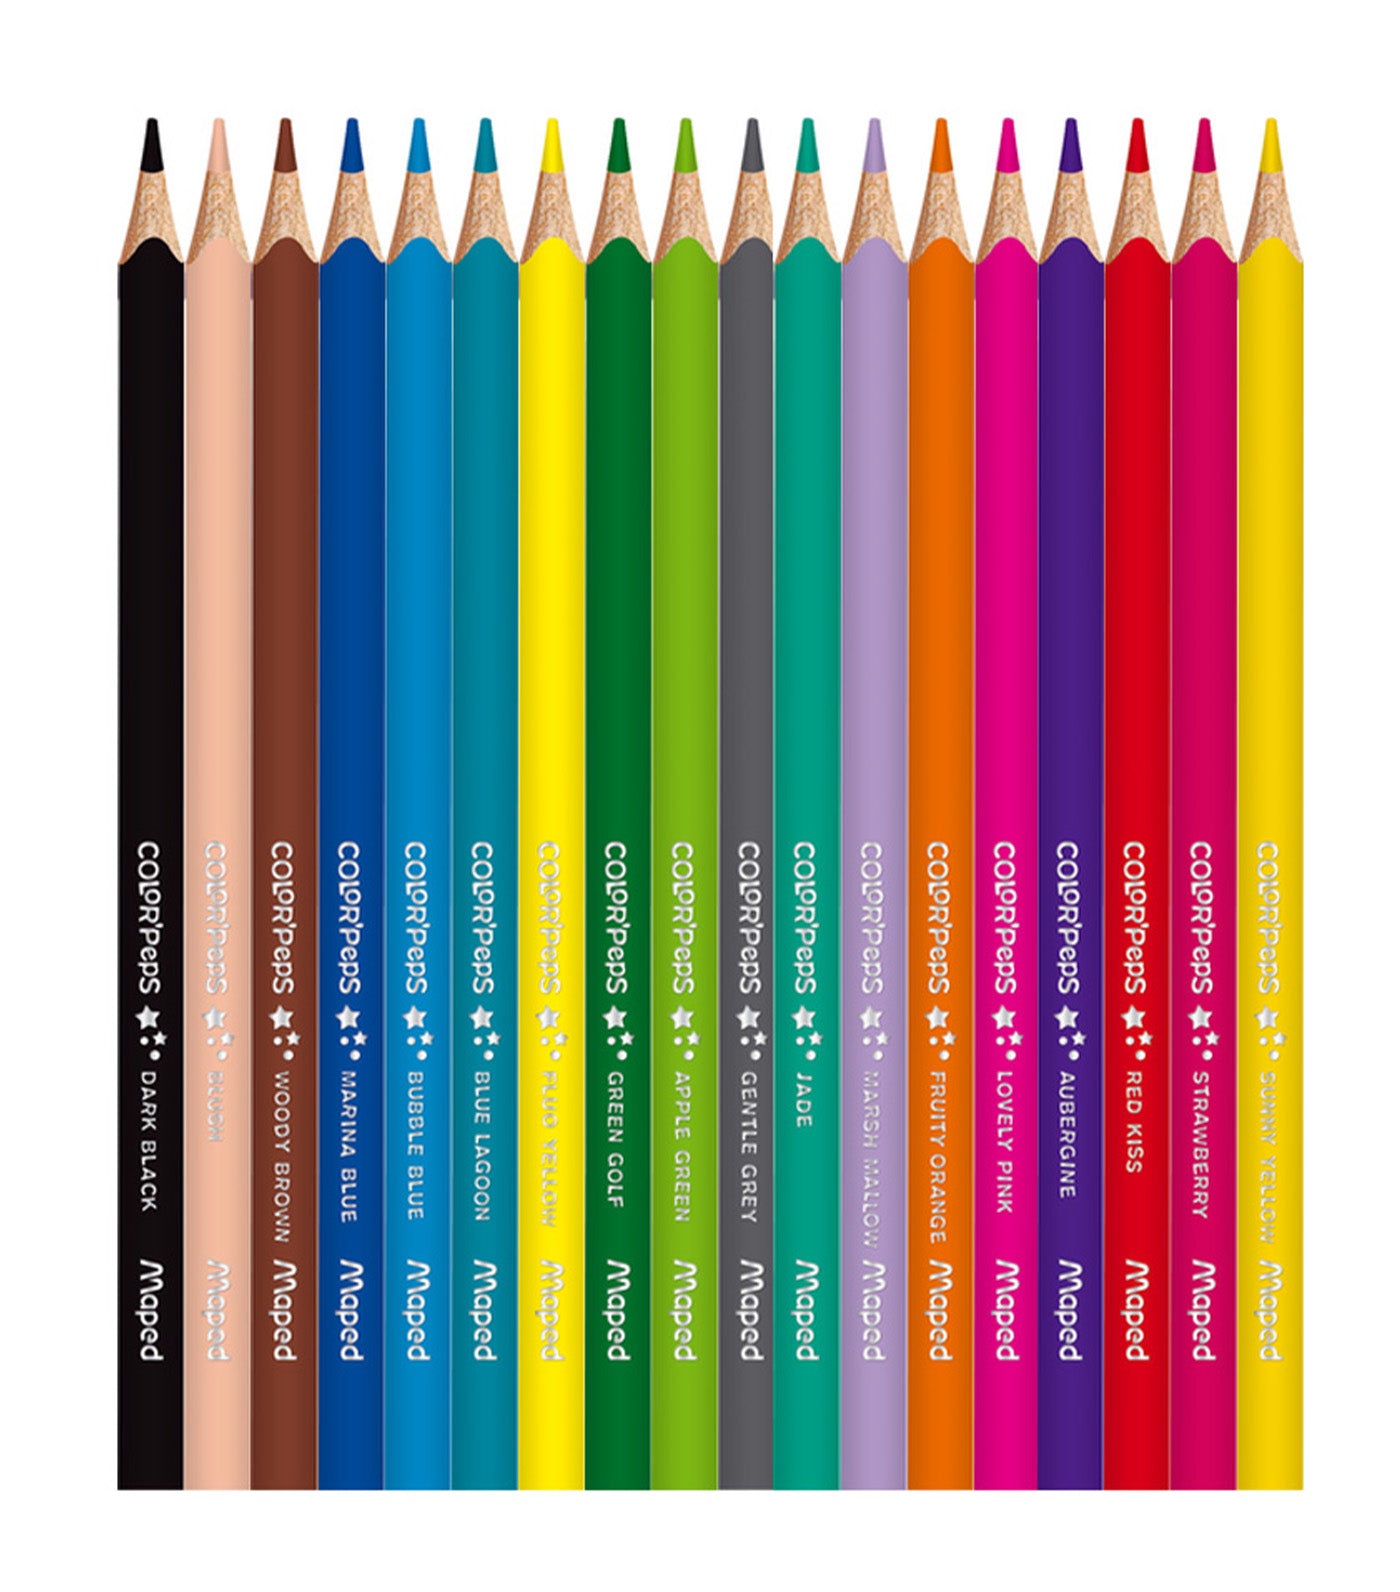 Color'Peps Colored Pencils in Metal Case x 18